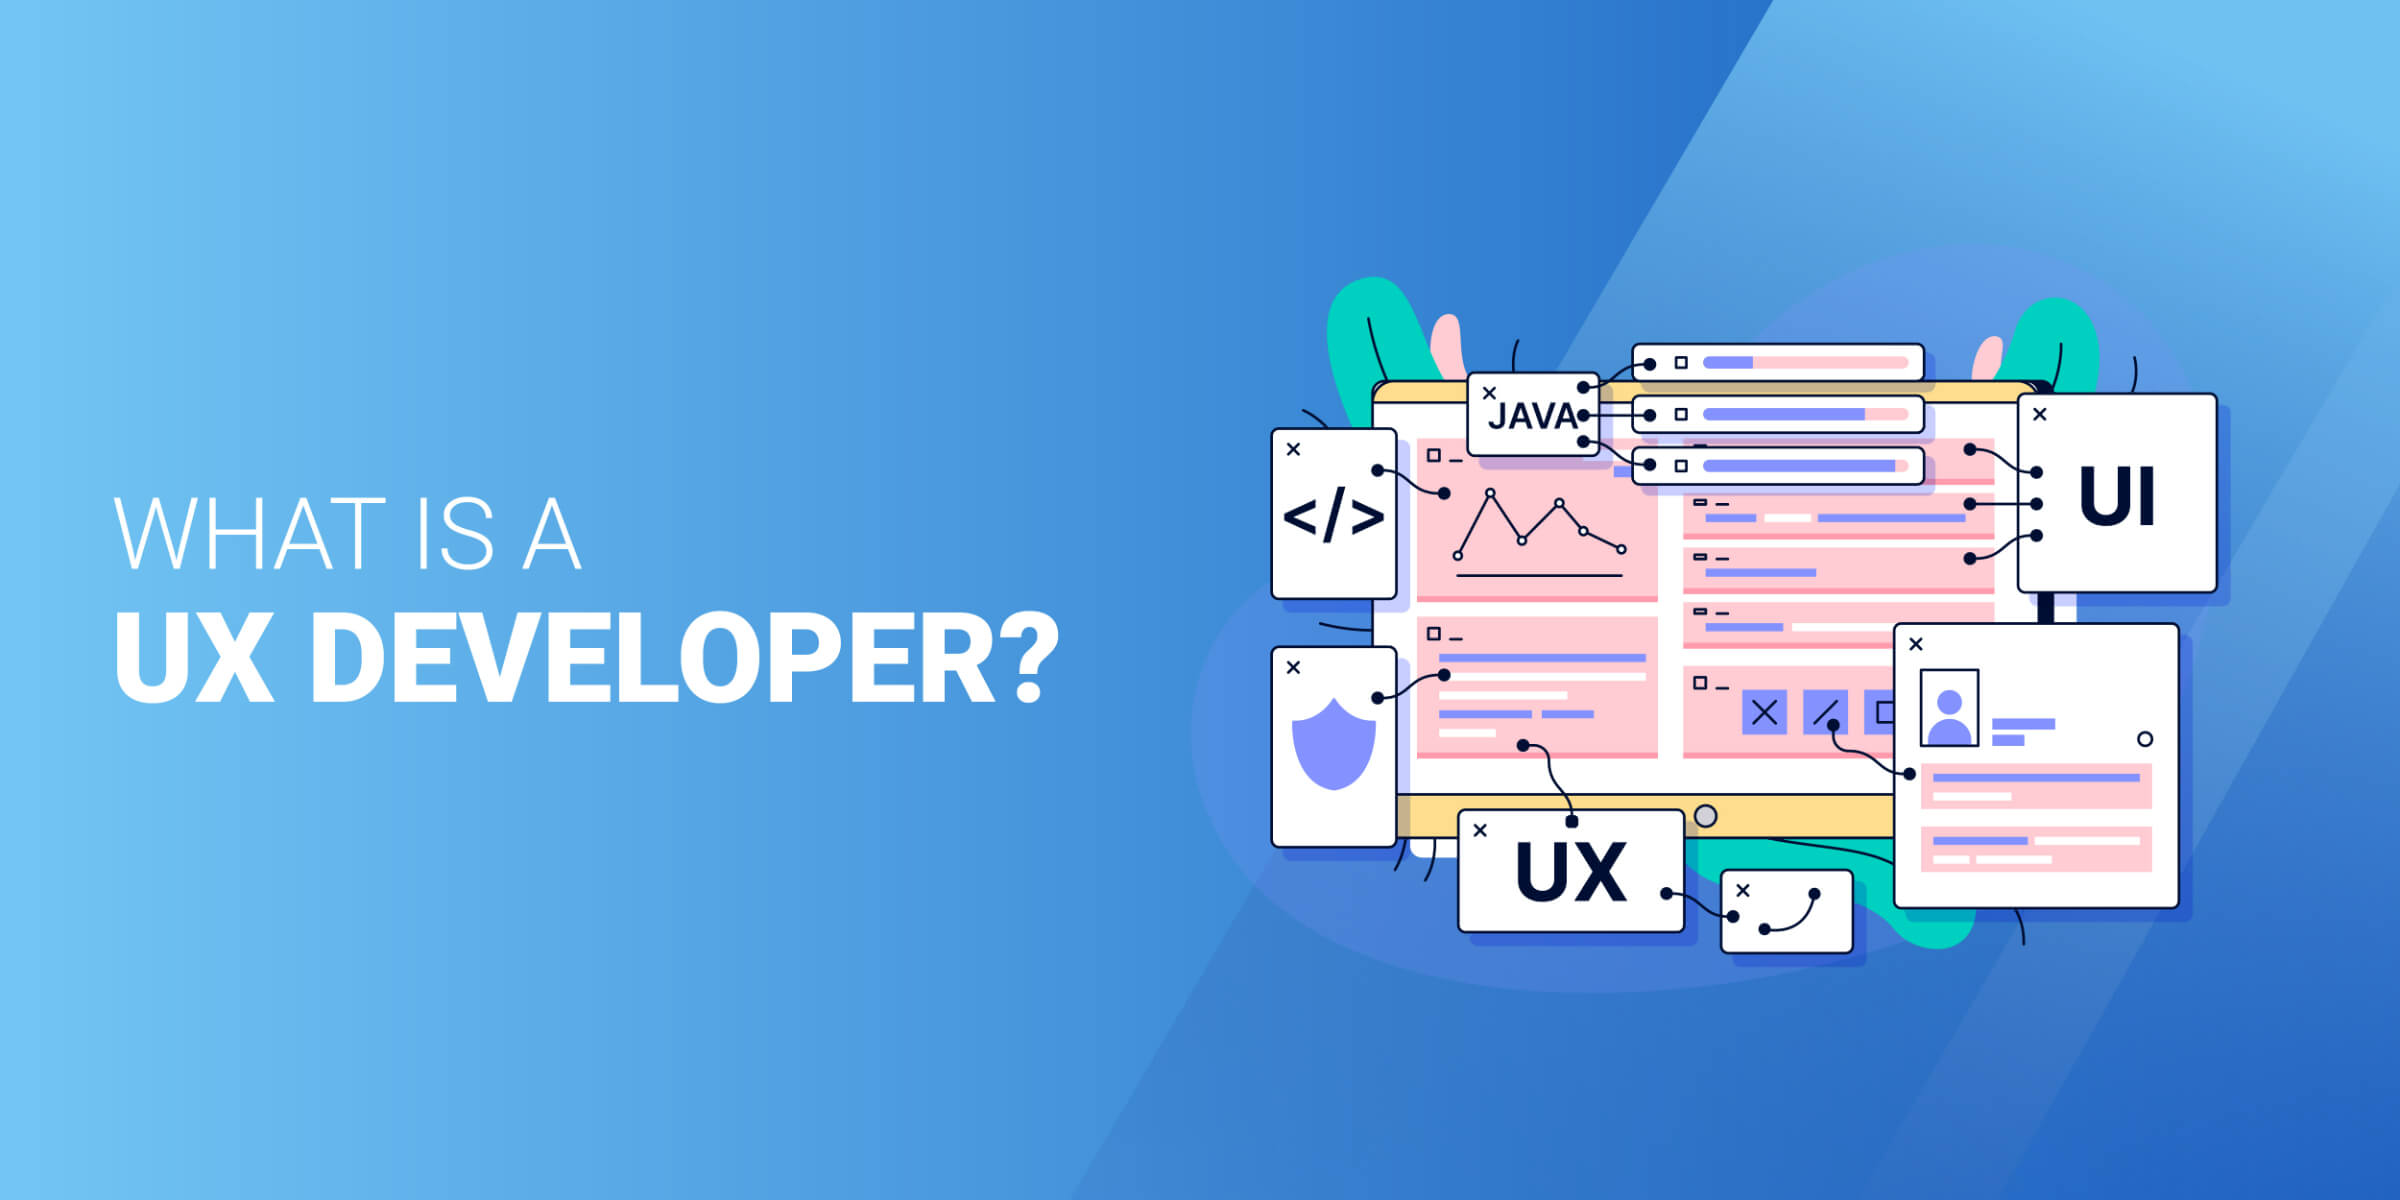 What Is a UX Developer